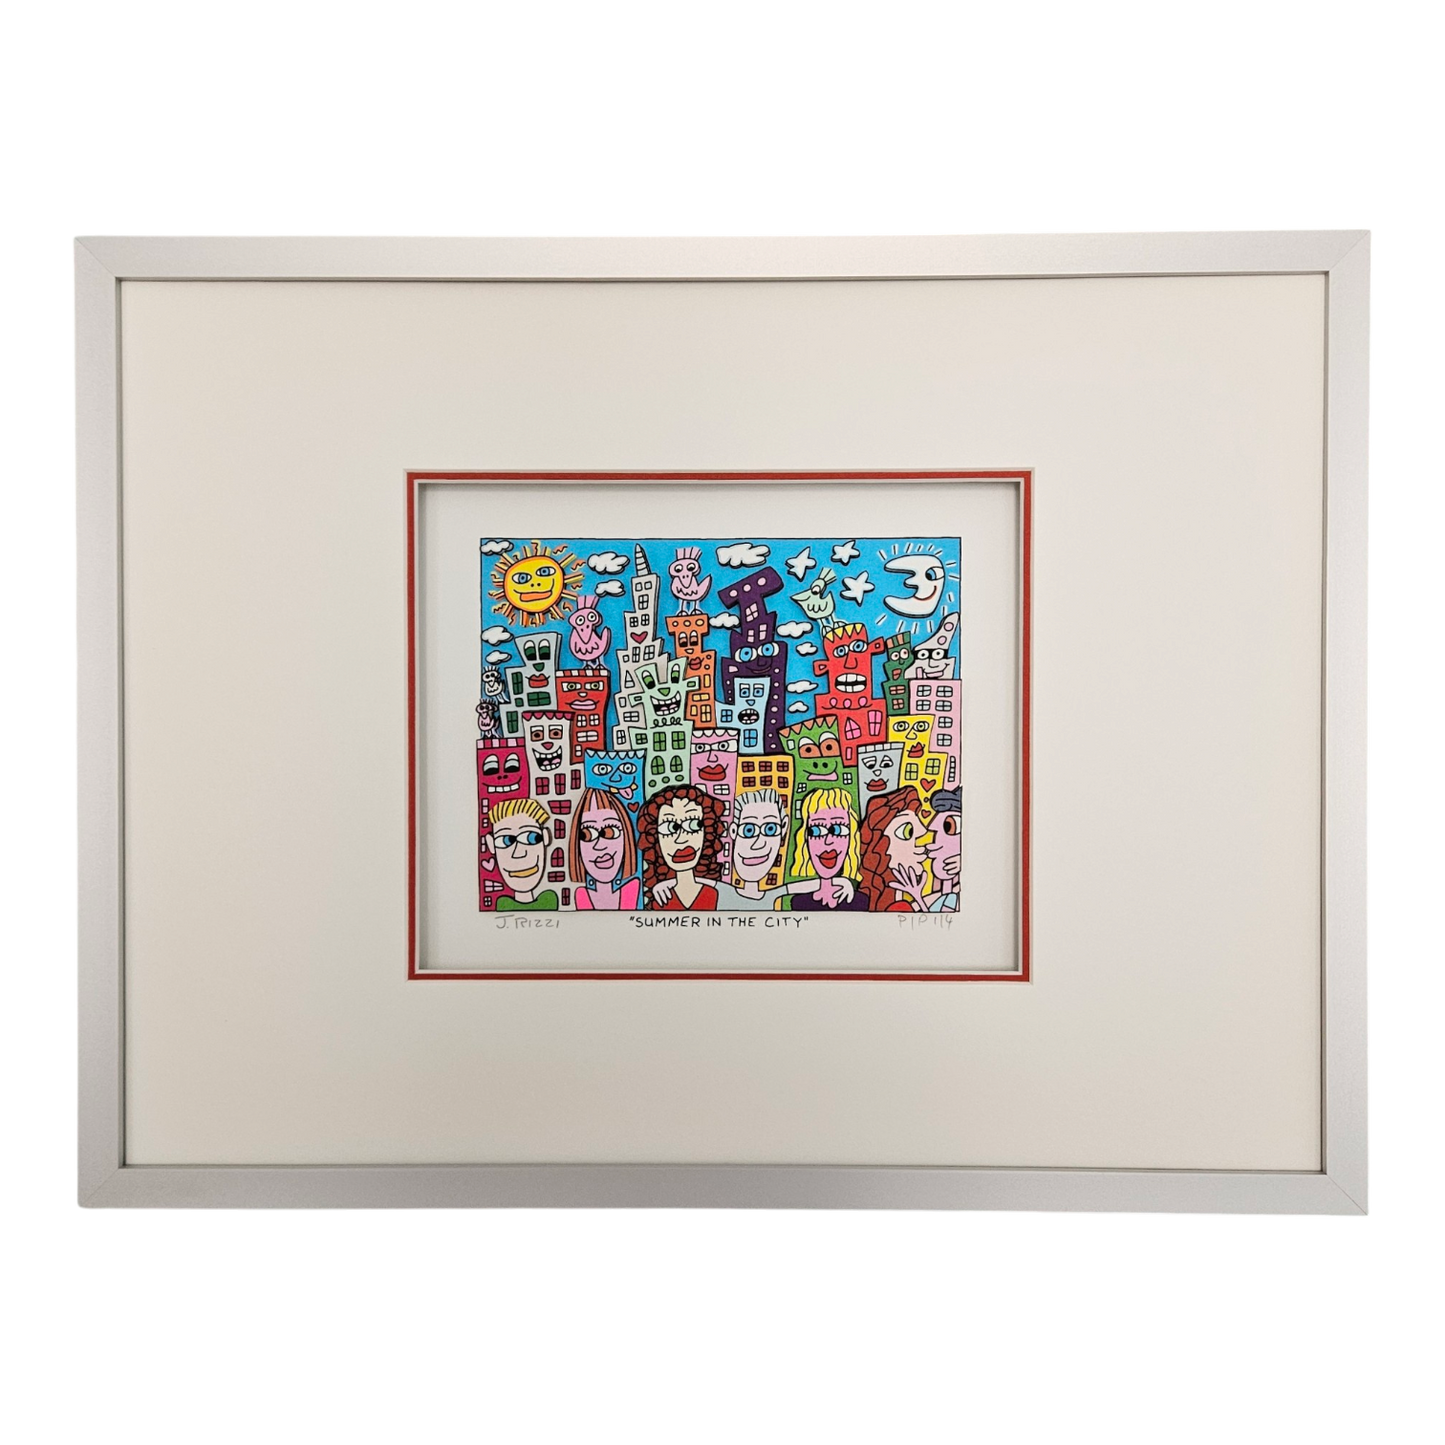 James Rizzi - Summer in the City (2014)